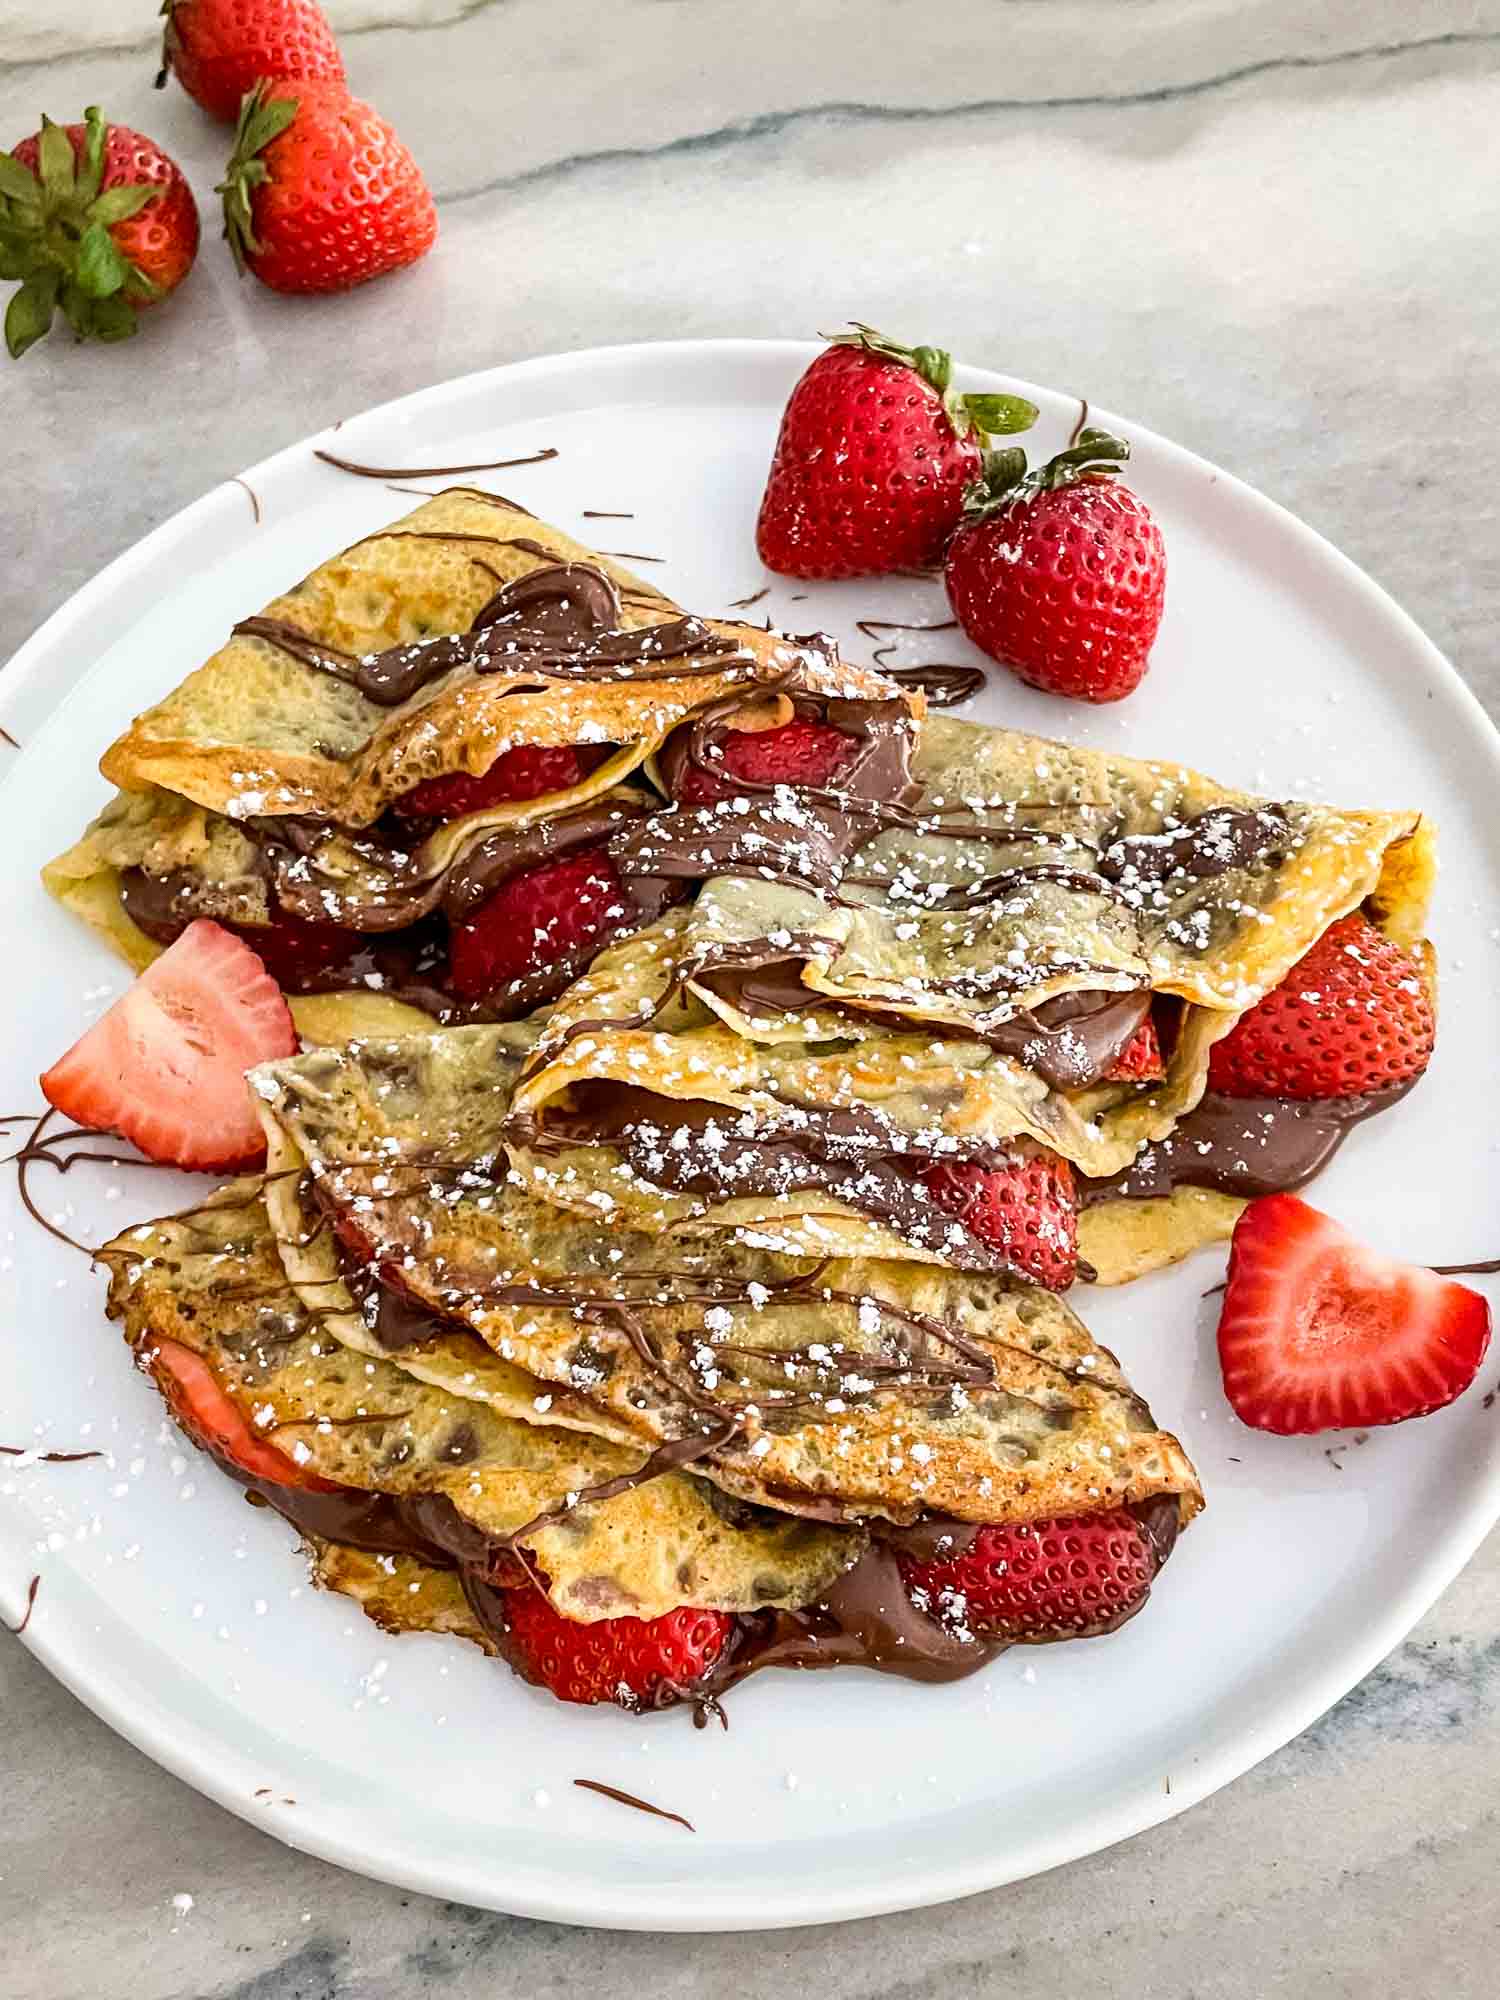 Strawberry Nutella Crepes on a white plate and garnished with more chocolate and fruit